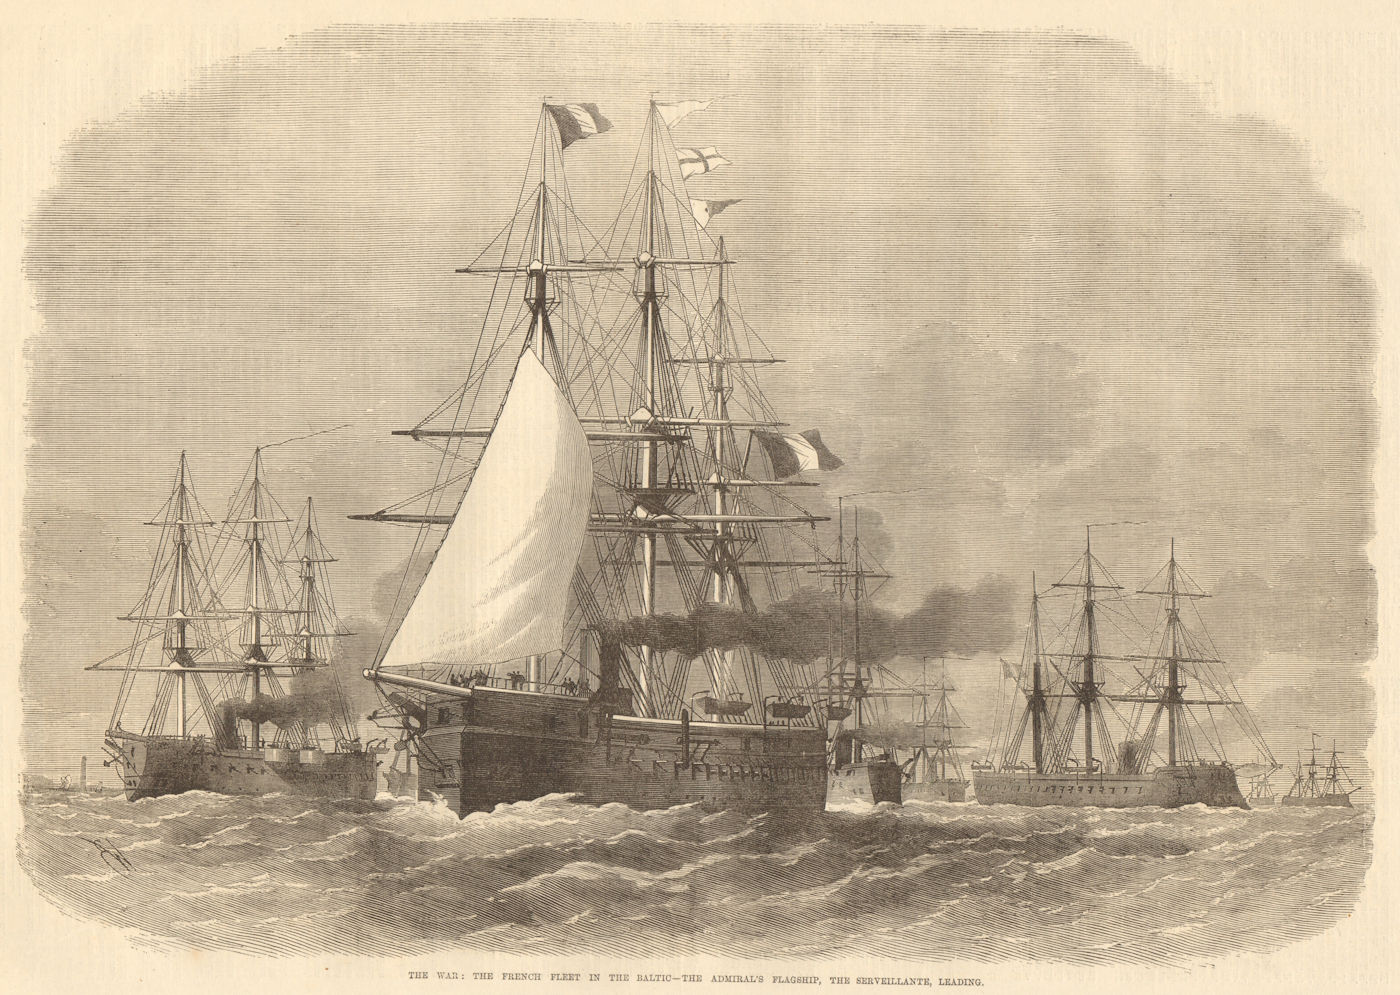 Associate Product Franco-Prussian war: the French fleet in the Baltic. Serveillante flagship 1870